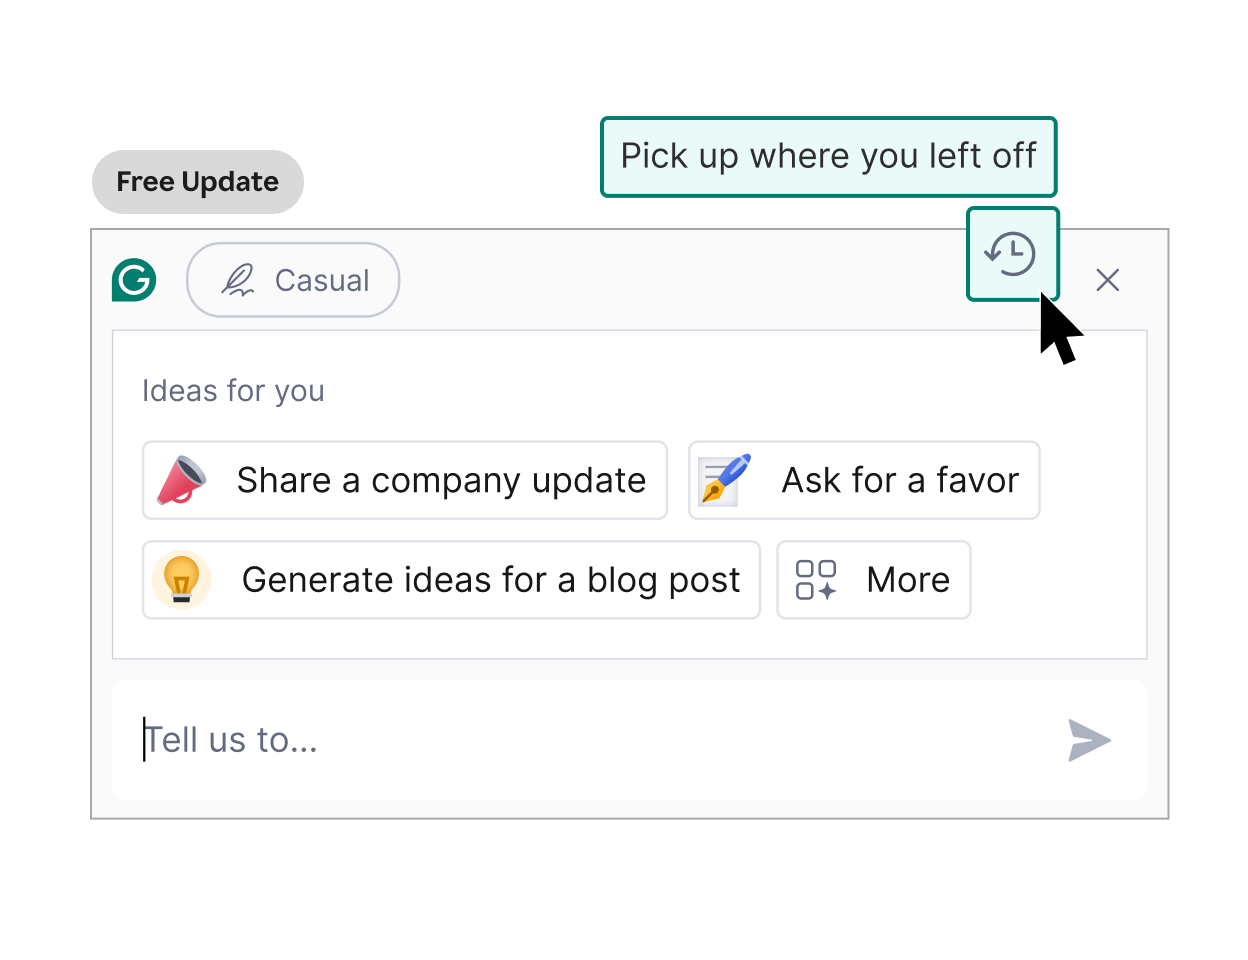 Grammarly allows you to pick up where you left off in a product window. 